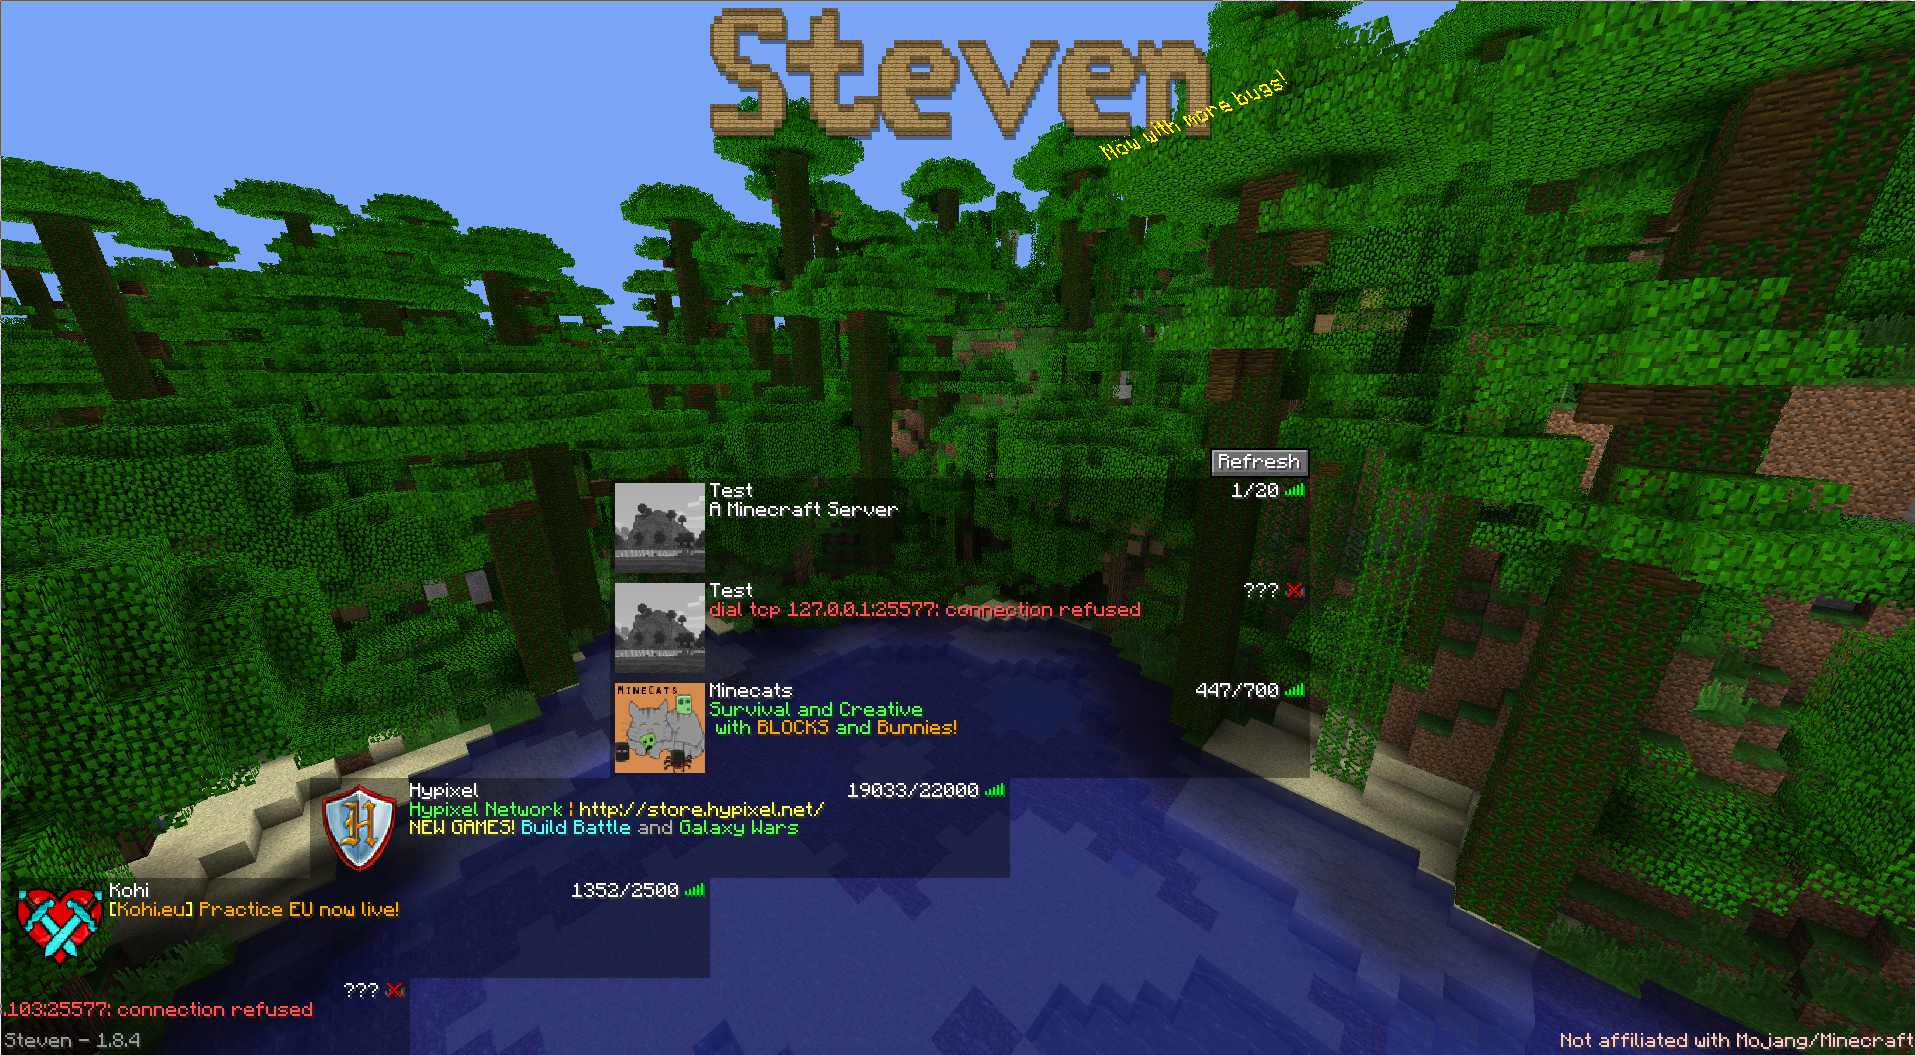 Steven's server list after disconnecting from a server